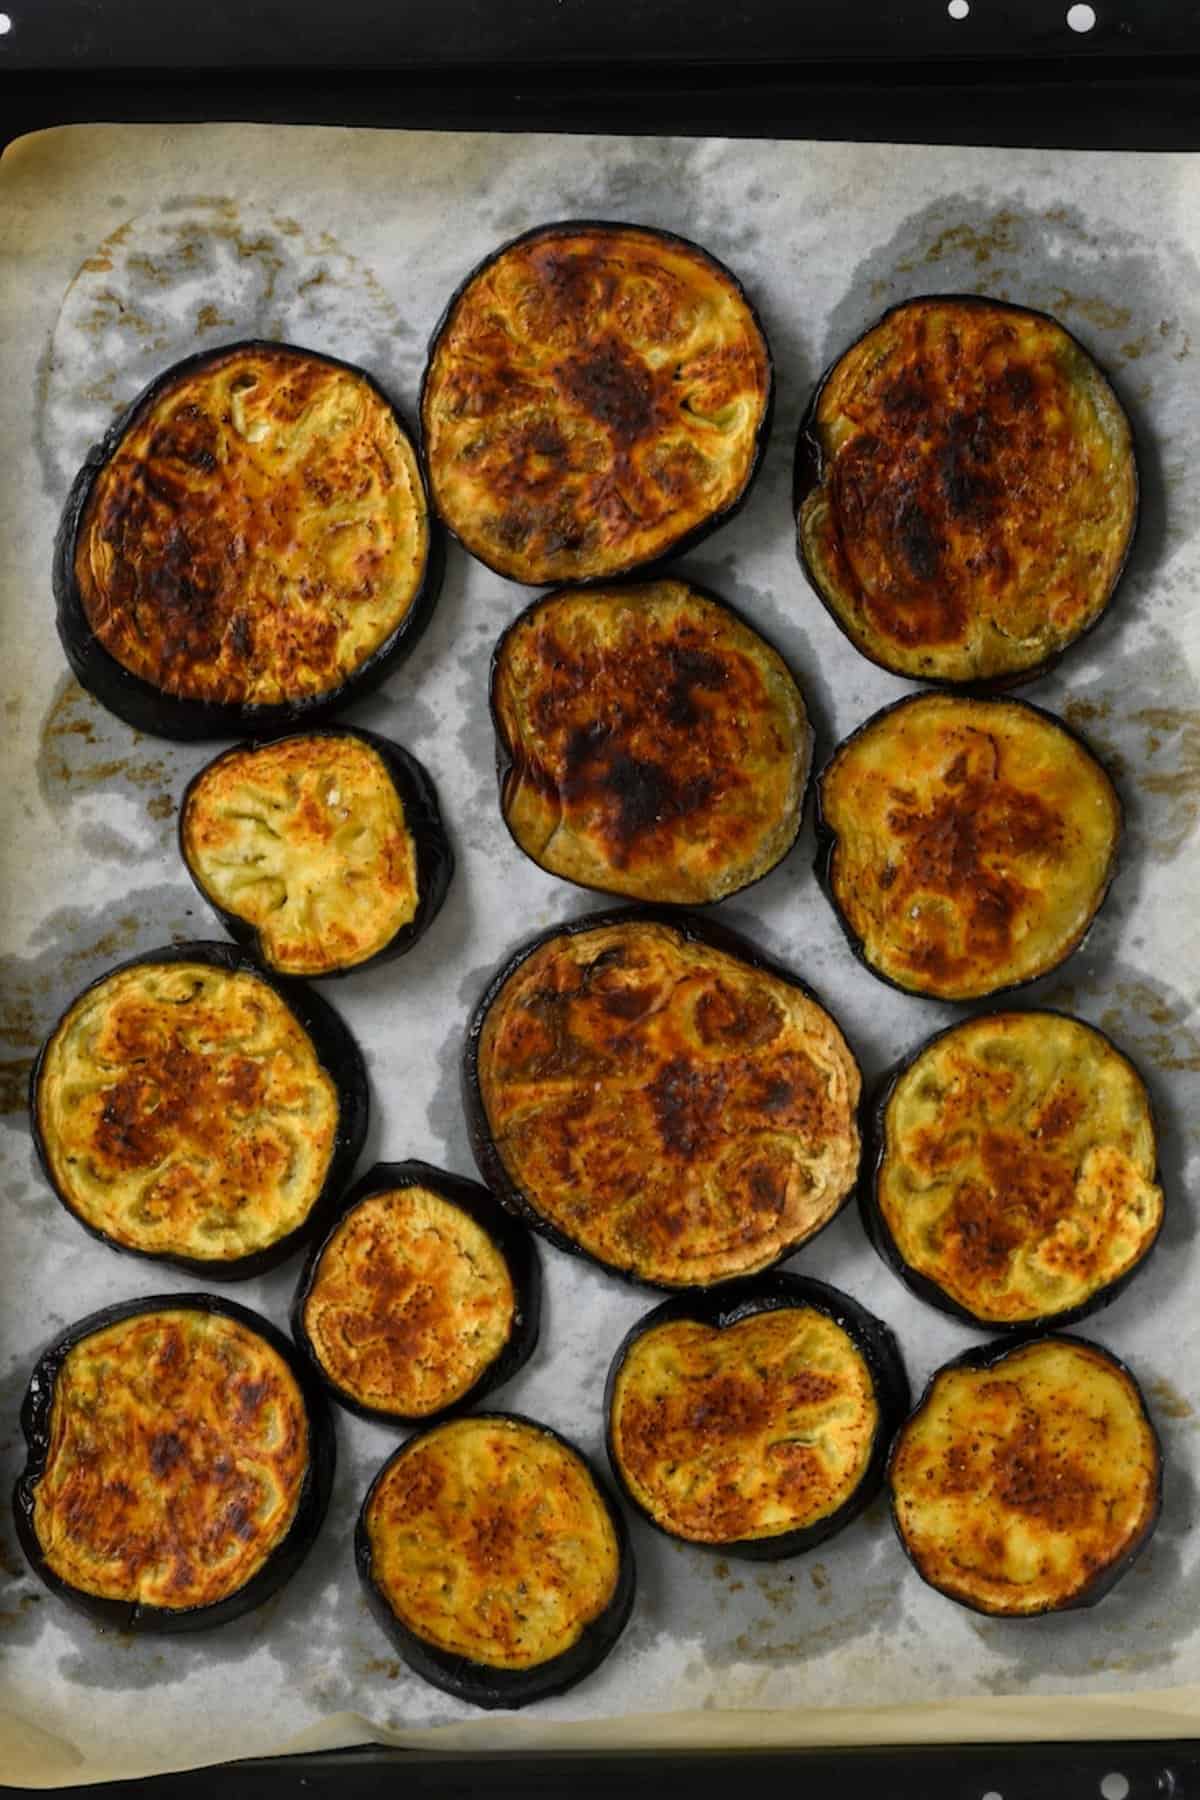 A baking tray with roasted eggplant slices fresh out of the oven